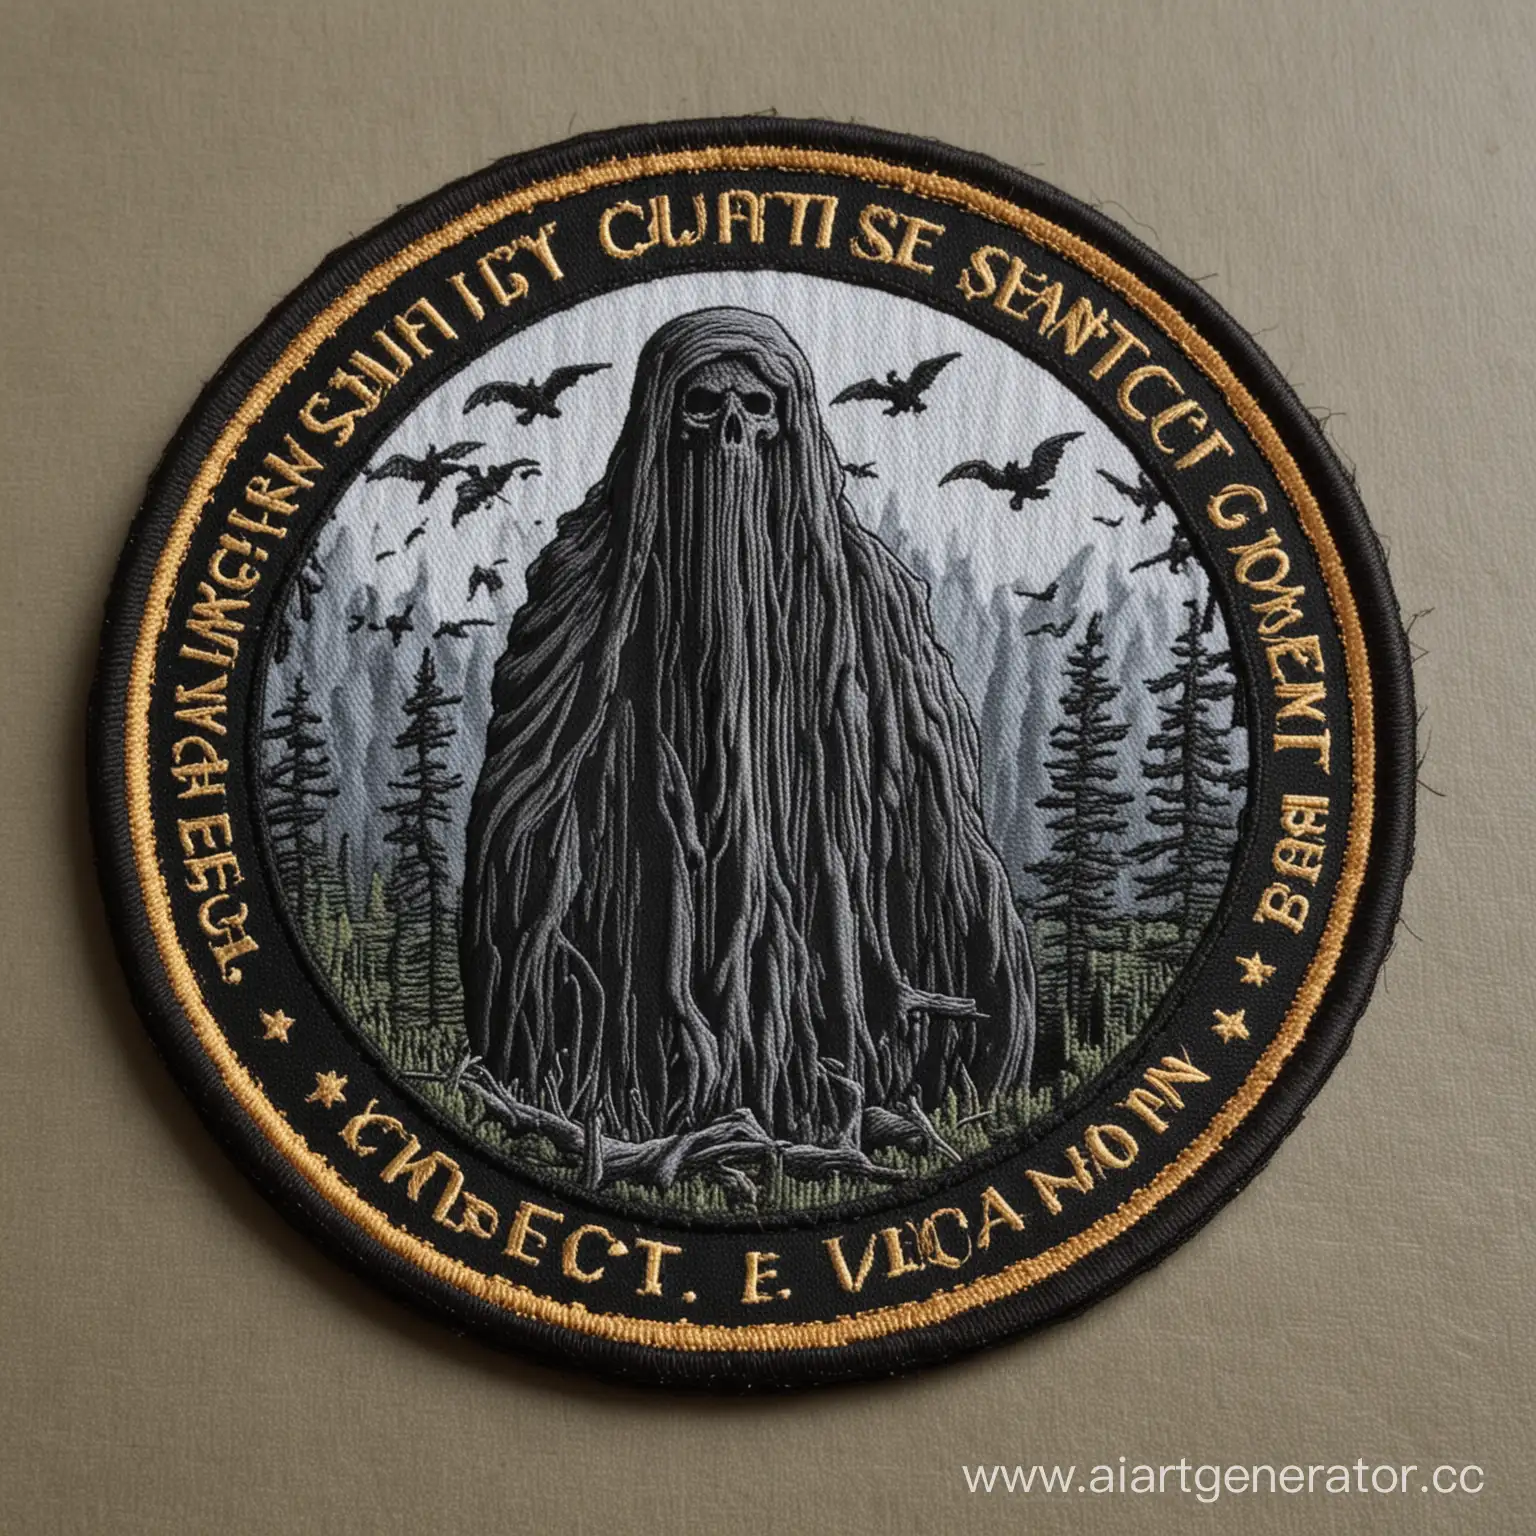 Spooky-Patch-with-Ghosts-in-a-Black-Forest-Scorn-Inscription